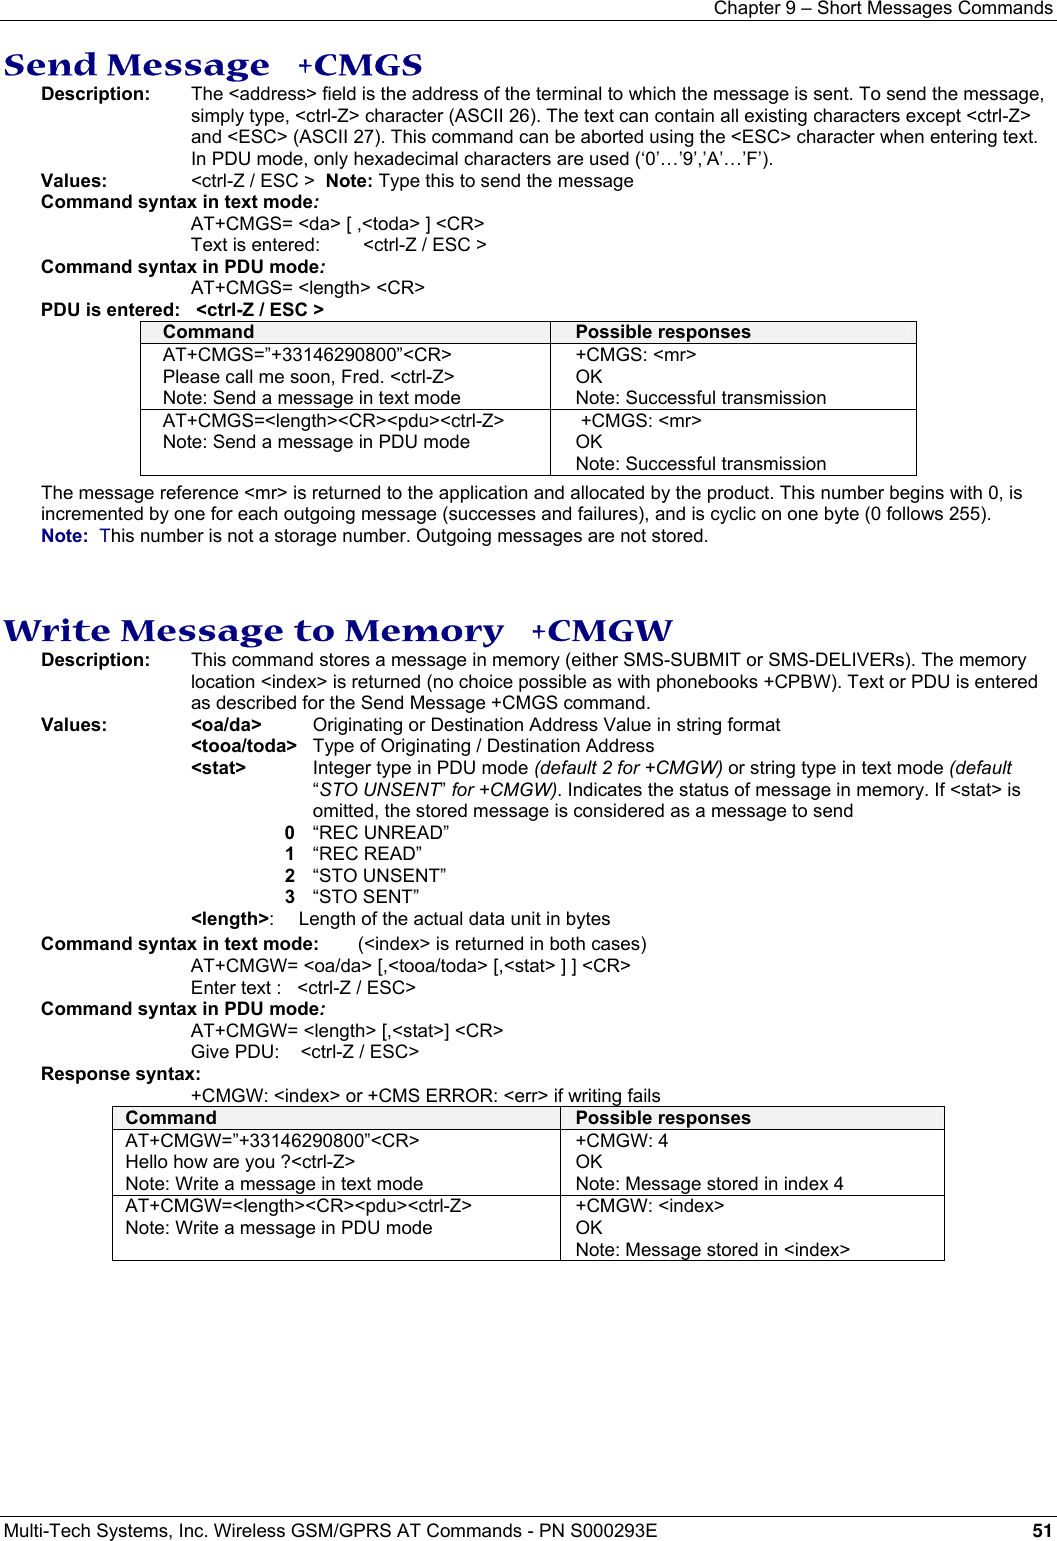 Chapter 9 – Short Messages Commands  Multi-Tech Systems, Inc. Wireless GSM/GPRS AT Commands - PN S000293E 51  Send Message   +CMGS Description:   The &lt;address&gt; field is the address of the terminal to which the message is sent. To send the message, simply type, &lt;ctrl-Z&gt; character (ASCII 26). The text can contain all existing characters except &lt;ctrl-Z&gt; and &lt;ESC&gt; (ASCII 27). This command can be aborted using the &lt;ESC&gt; character when entering text. In PDU mode, only hexadecimal characters are used (‘0’…’9’,’A’…’F’).   Values:   &lt;ctrl-Z / ESC &gt;  Note: Type this to send the message Command syntax in text mode:  AT+CMGS= &lt;da&gt; [ ,&lt;toda&gt; ] &lt;CR&gt;  Text is entered:    &lt;ctrl-Z / ESC &gt; Command syntax in PDU mode:  AT+CMGS= &lt;length&gt; &lt;CR&gt; PDU is entered:   &lt;ctrl-Z / ESC &gt; Command  Possible responses AT+CMGS=”+33146290800”&lt;CR&gt; Please call me soon, Fred. &lt;ctrl-Z&gt; Note: Send a message in text mode +CMGS: &lt;mr&gt; OK Note: Successful transmission AT+CMGS=&lt;length&gt;&lt;CR&gt;&lt;pdu&gt;&lt;ctrl-Z&gt; Note: Send a message in PDU mode  +CMGS: &lt;mr&gt; OK Note: Successful transmission The message reference &lt;mr&gt; is returned to the application and allocated by the product. This number begins with 0, is incremented by one for each outgoing message (successes and failures), and is cyclic on one byte (0 follows 255).       Note:  This number is not a storage number. Outgoing messages are not stored.   Write Message to Memory   +CMGW Description:  This command stores a message in memory (either SMS-SUBMIT or SMS-DELIVERs). The memory location &lt;index&gt; is returned (no choice possible as with phonebooks +CPBW). Text or PDU is entered as described for the Send Message +CMGS command. Values: &lt;oa/da&gt;   Originating or Destination Address Value in string format  &lt;tooa/toda&gt;  Type of Originating / Destination Address  &lt;stat&gt;  Integer type in PDU mode (default 2 for +CMGW) or string type in text mode (default “STO UNSENT” for +CMGW). Indicates the status of message in memory. If &lt;stat&gt; is omitted, the stored message is considered as a message to send  0  “REC UNREAD”  1 “REC READ”  2 “STO UNSENT”  3 “STO SENT”  &lt;length&gt;:   Length of the actual data unit in bytes Command syntax in text mode:  (&lt;index&gt; is returned in both cases)  AT+CMGW= &lt;oa/da&gt; [,&lt;tooa/toda&gt; [,&lt;stat&gt; ] ] &lt;CR&gt;  Enter text :   &lt;ctrl-Z / ESC&gt; Command syntax in PDU mode:  AT+CMGW= &lt;length&gt; [,&lt;stat&gt;] &lt;CR&gt;  Give PDU:    &lt;ctrl-Z / ESC&gt; Response syntax:    +CMGW: &lt;index&gt; or +CMS ERROR: &lt;err&gt; if writing fails Command  Possible responses AT+CMGW=”+33146290800”&lt;CR&gt; Hello how are you ?&lt;ctrl-Z&gt; Note: Write a message in text mode +CMGW: 4 OK Note: Message stored in index 4 AT+CMGW=&lt;length&gt;&lt;CR&gt;&lt;pdu&gt;&lt;ctrl-Z&gt; Note: Write a message in PDU mode +CMGW: &lt;index&gt; OK Note: Message stored in &lt;index&gt;  